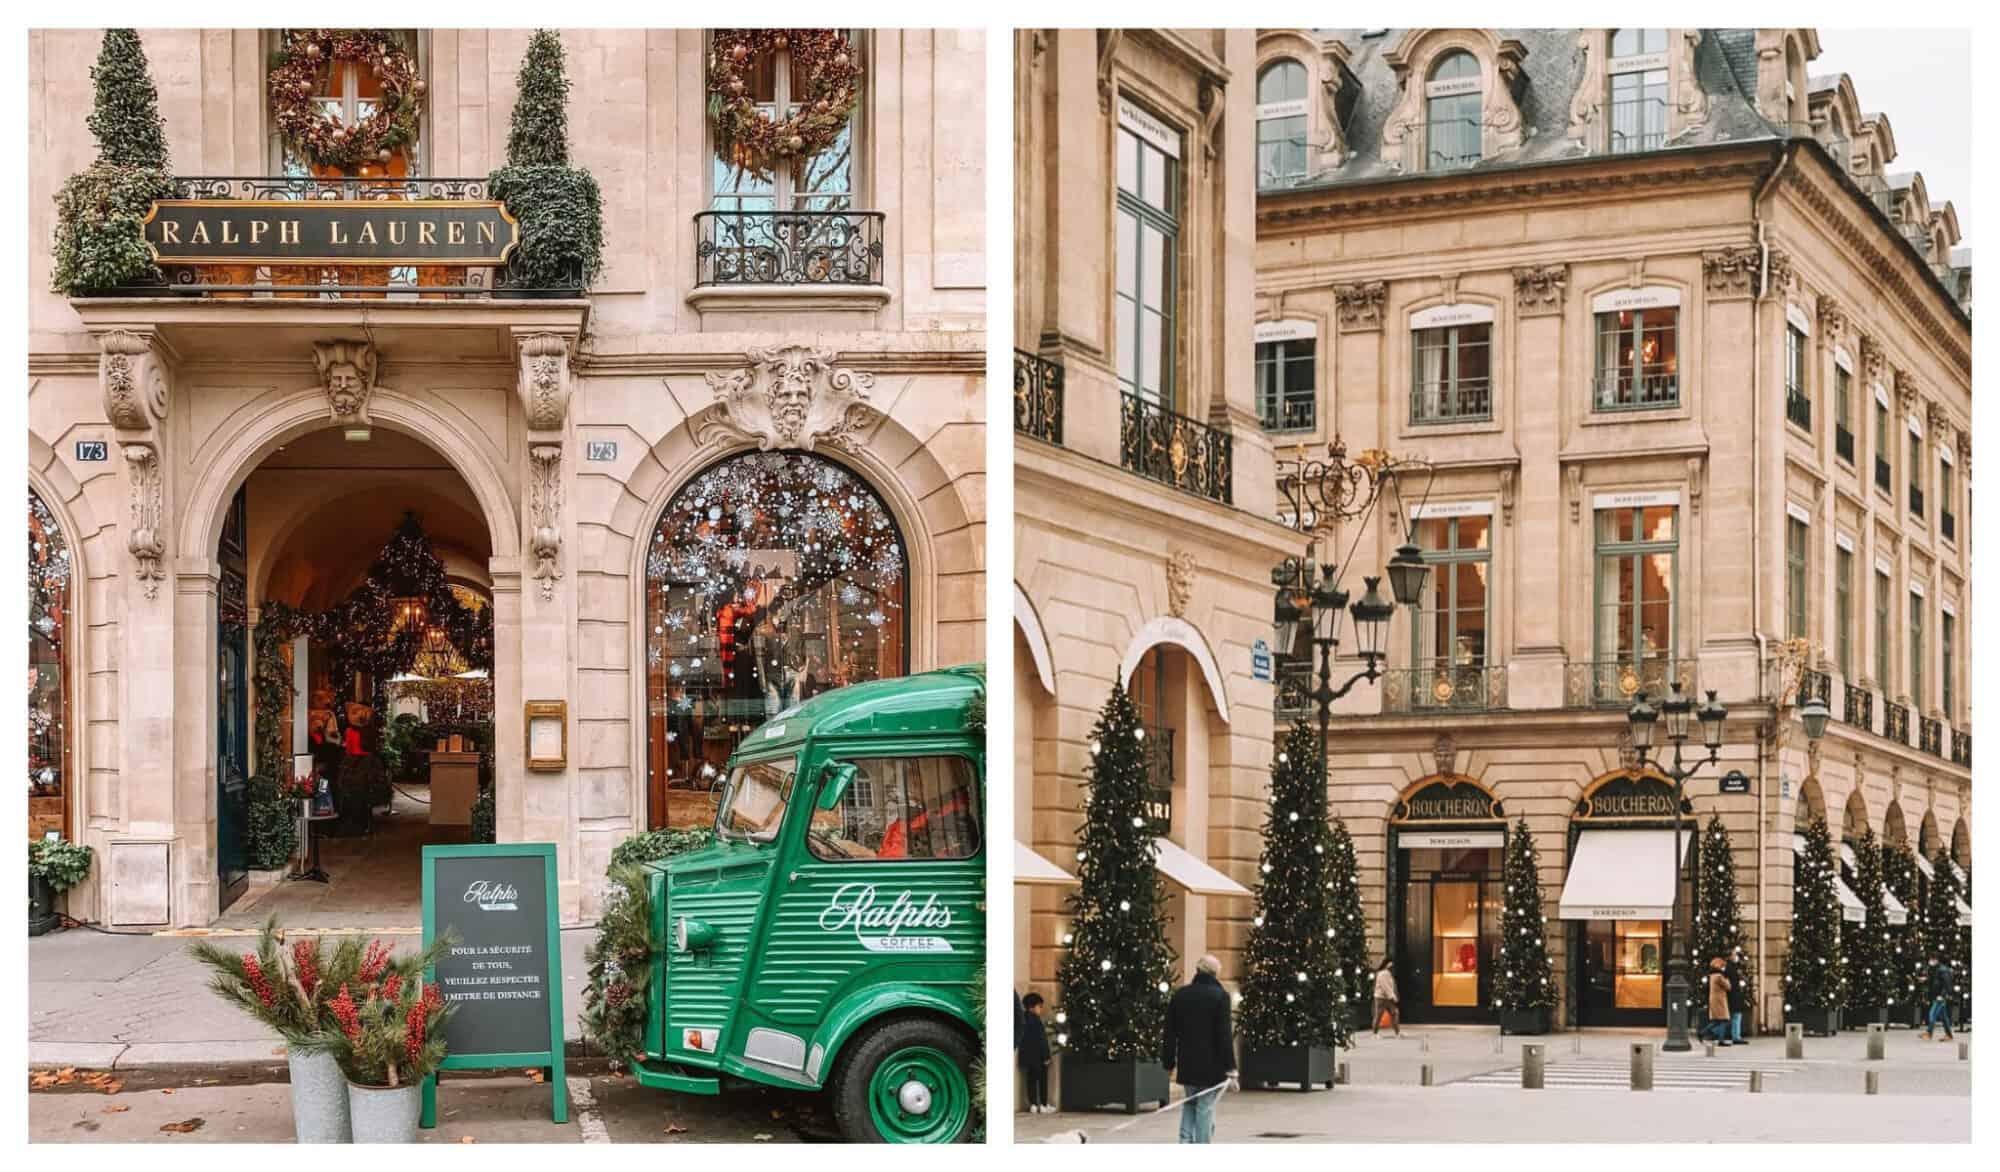 Left: Outside Ralph's Cafe with Christmas decorations and a green coffee truck; Right: Place Vendome Paris in full Christmas decorations.